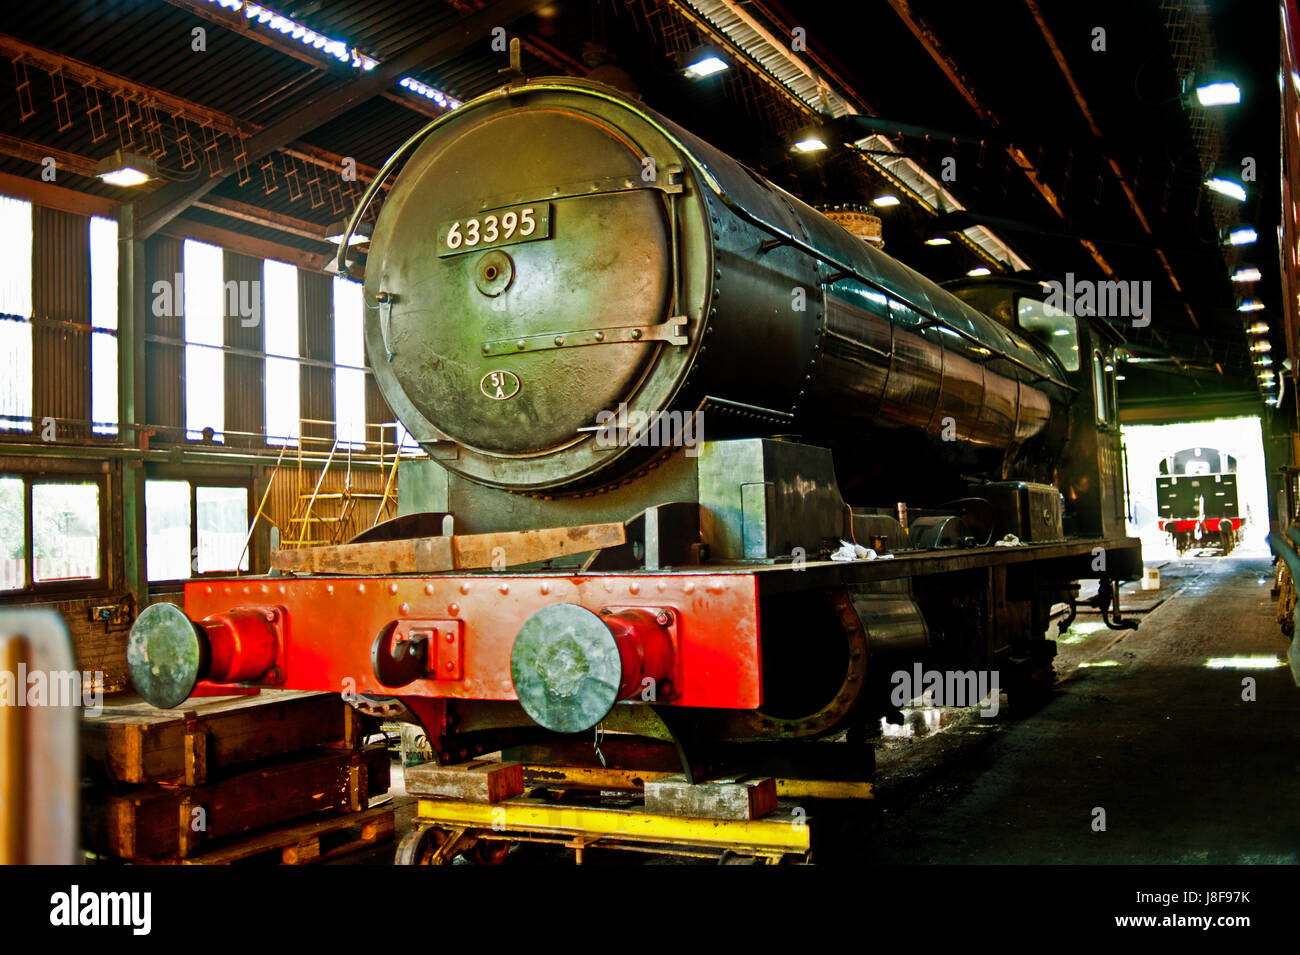 Q6 No 63395 without its wheels in Grosmont motive power depot awaiting overhaul, North Yorkshire Moors railway Stock Photo